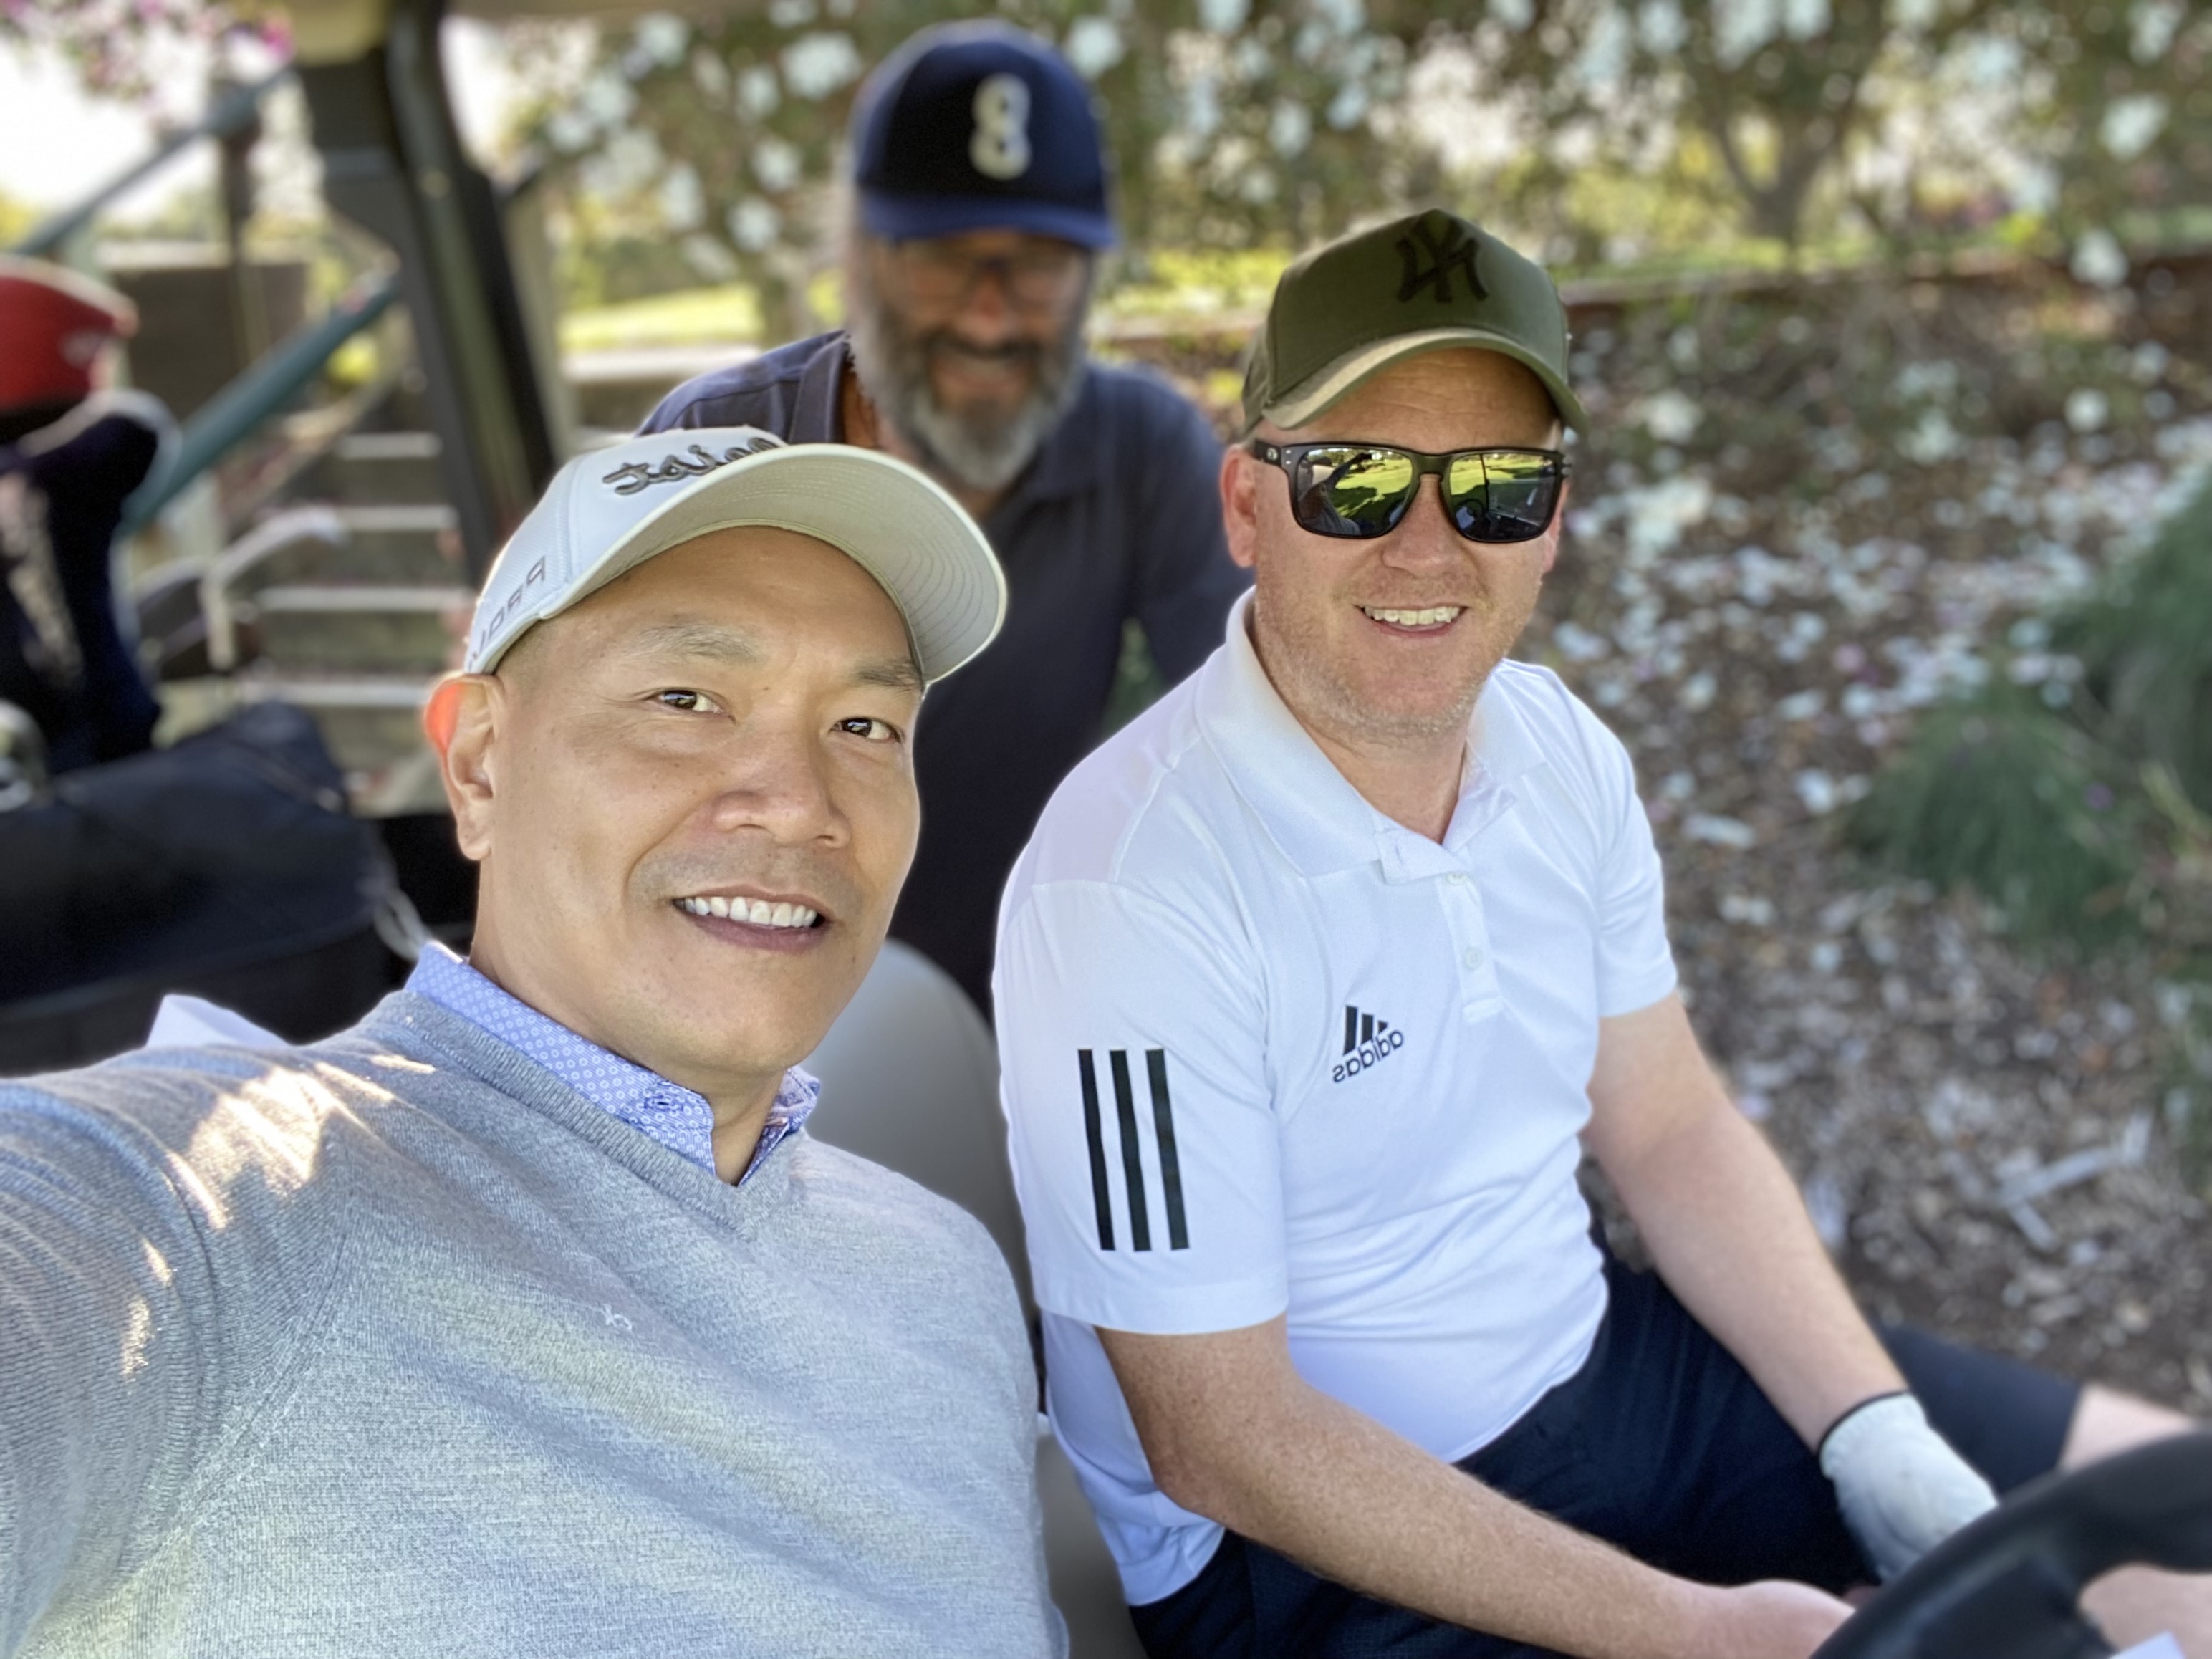 Team members playing golf at ASGA NSW Golf Event